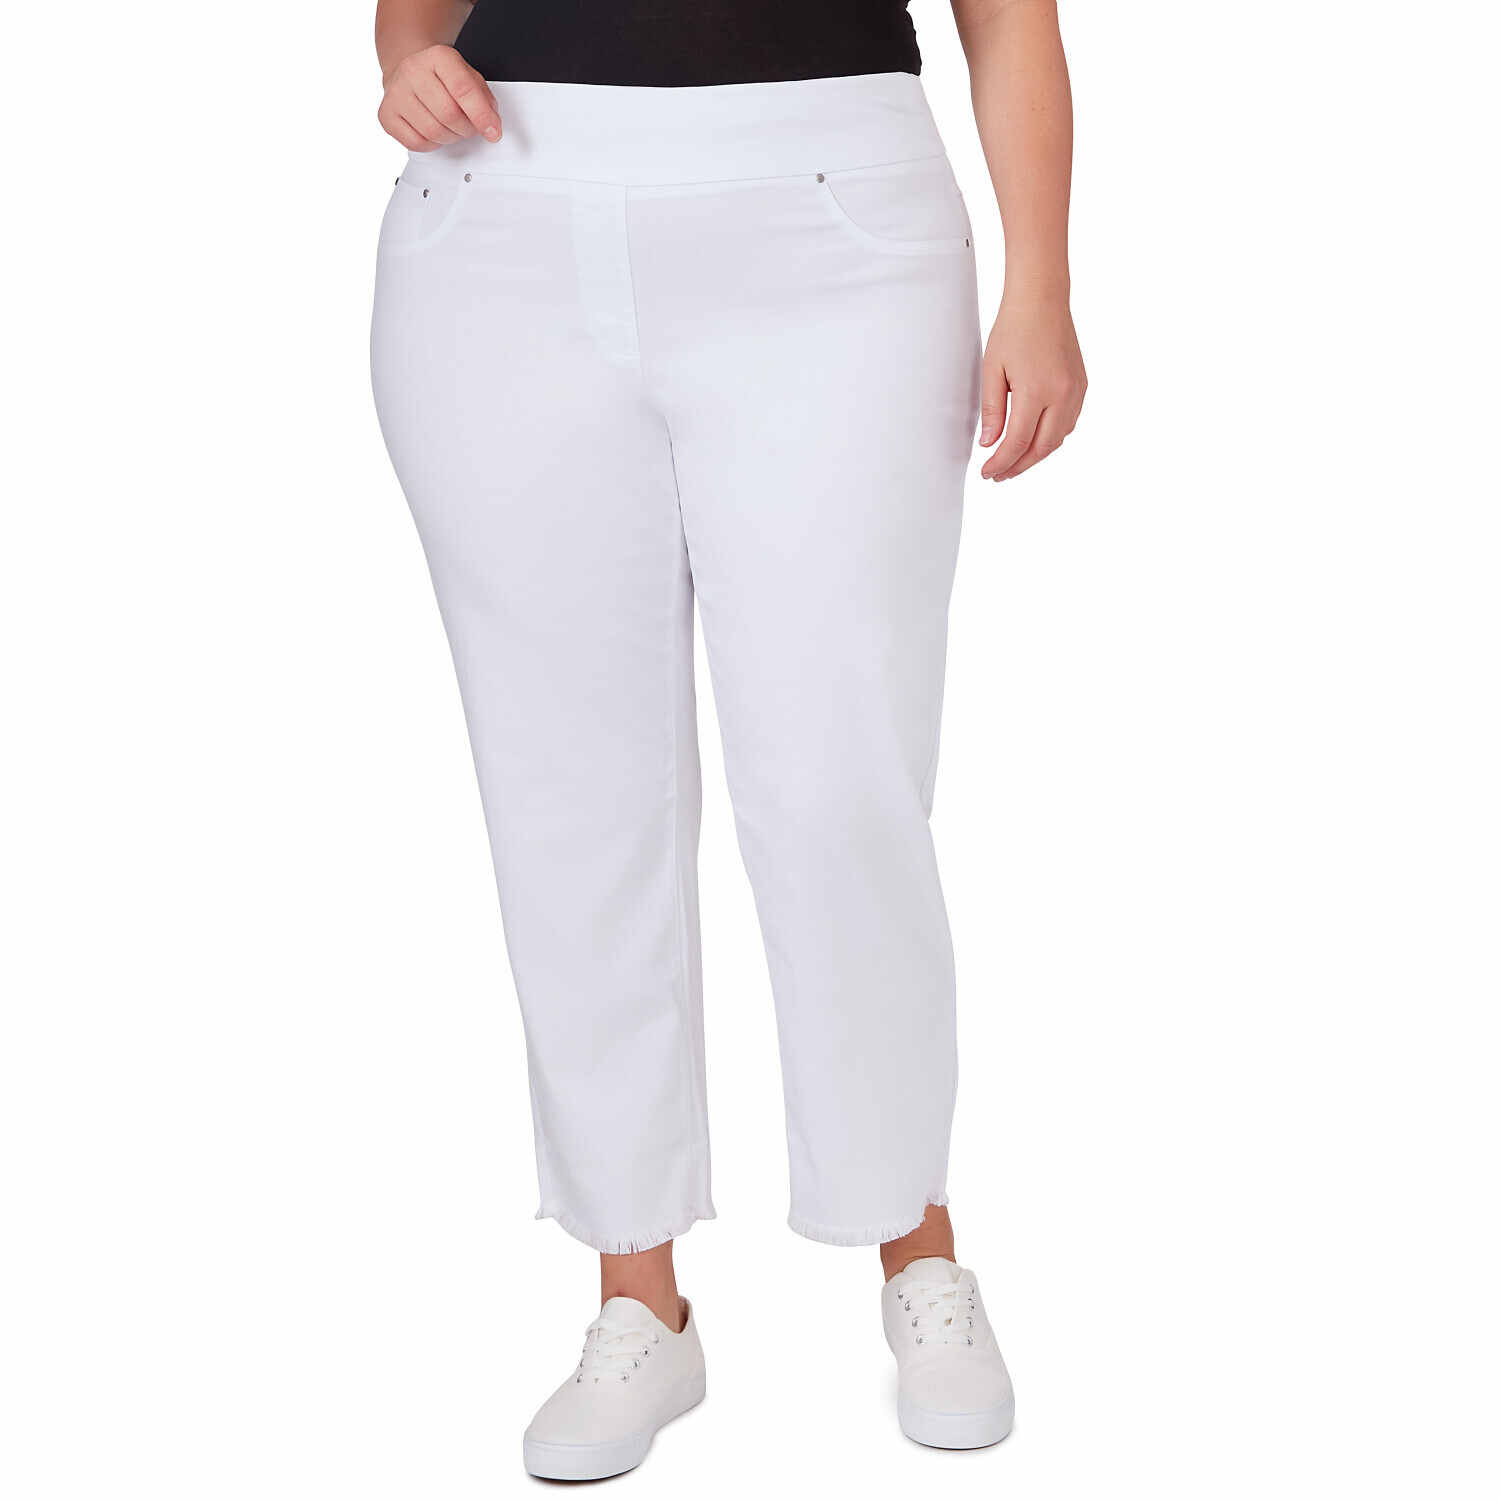 Women's Plus Size Solid High Waist Stretch Cropped Skinny Pants